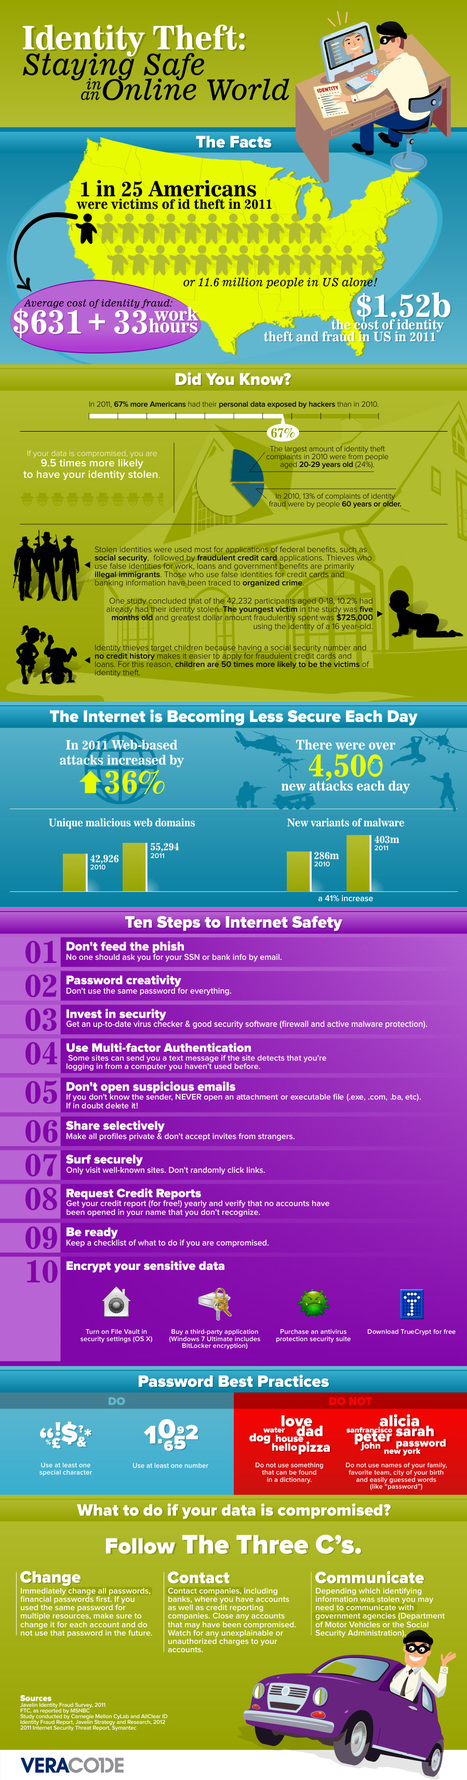 Identity Theft: Keeping Safe in an Online World [Infographic] | 21st Century Learning and Teaching | Scoop.it